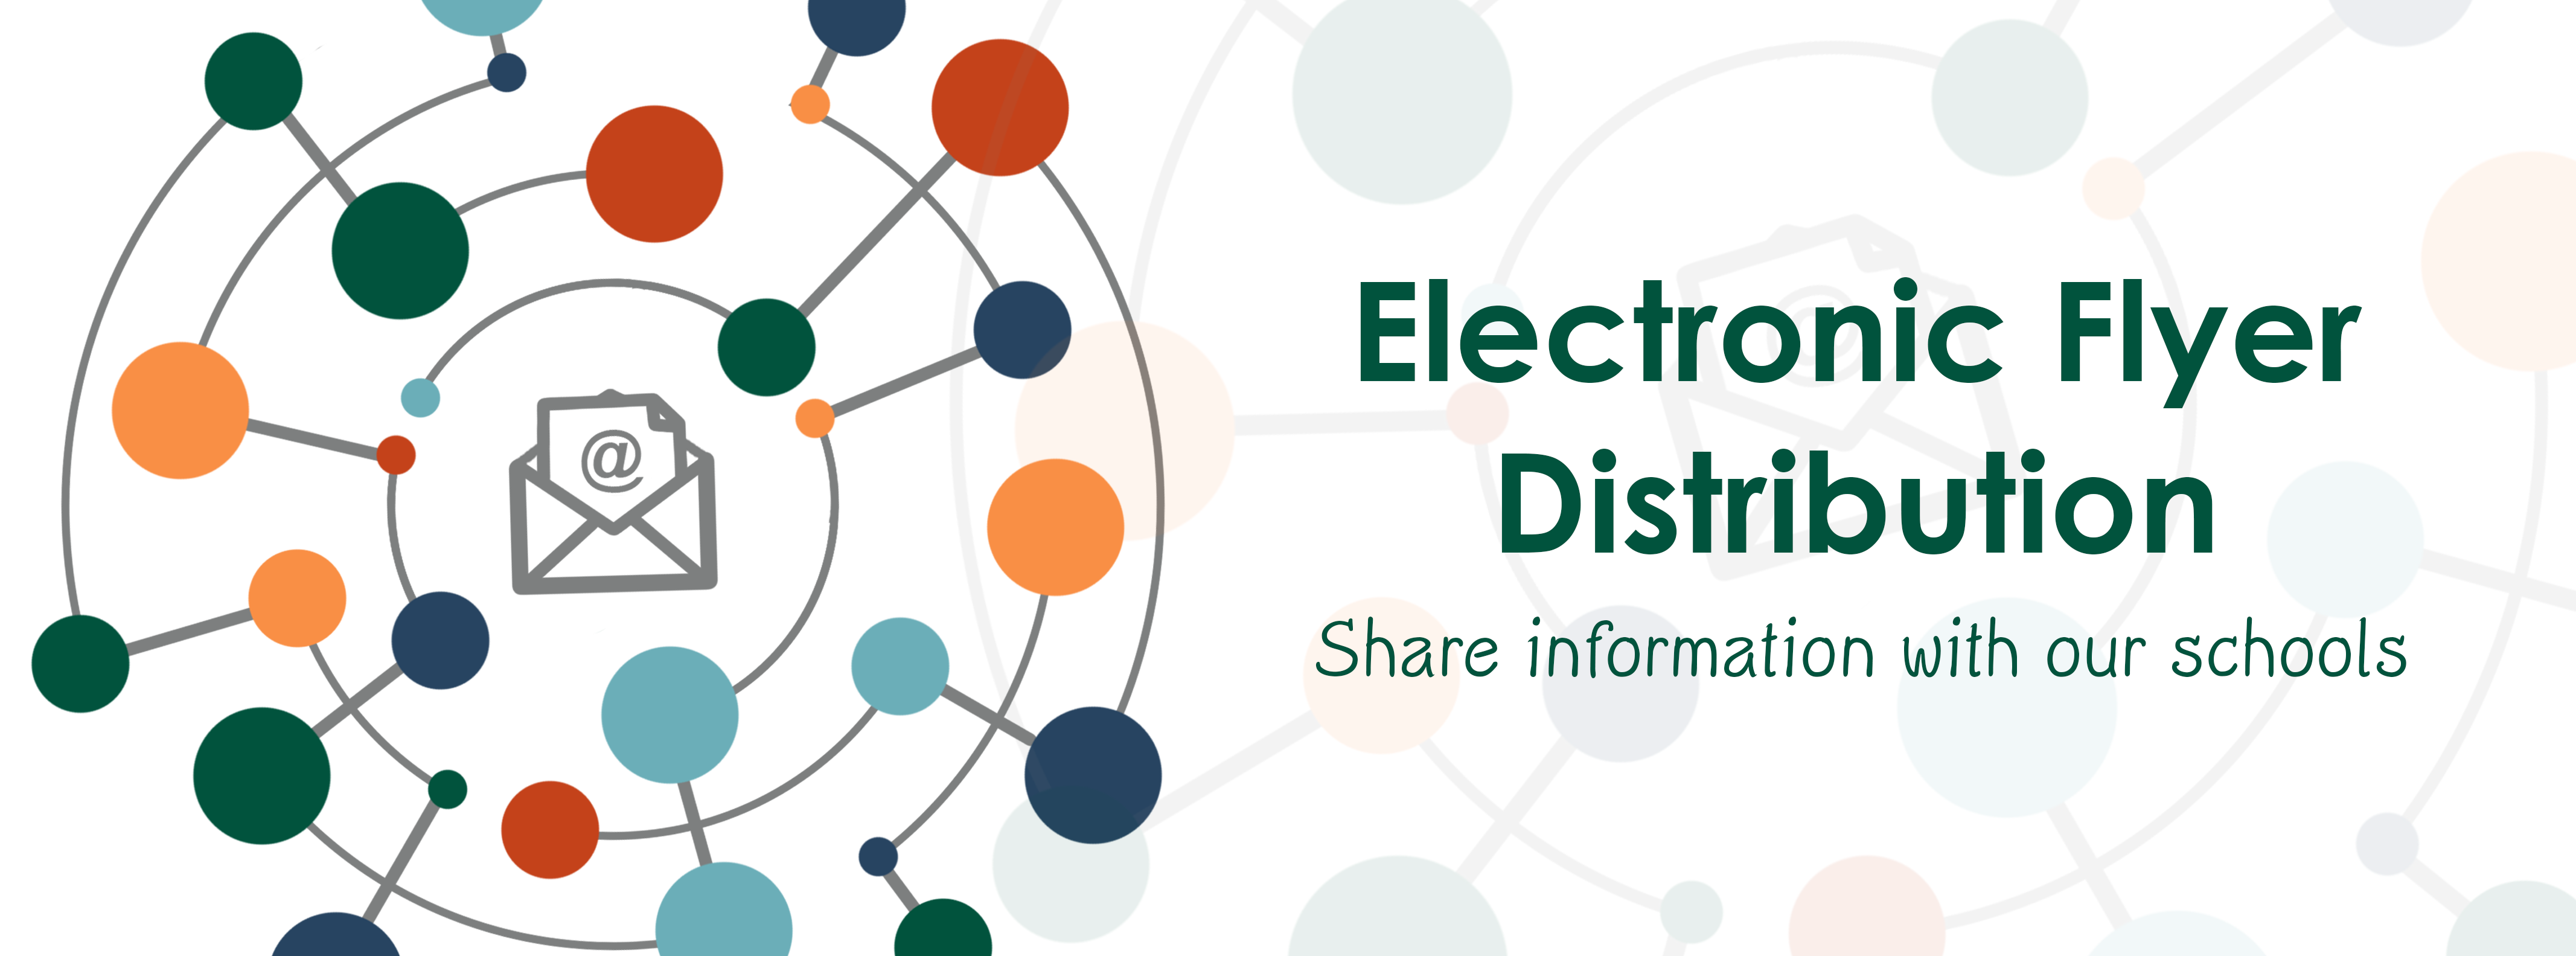 Electronic Flyer Dist - website banner.png